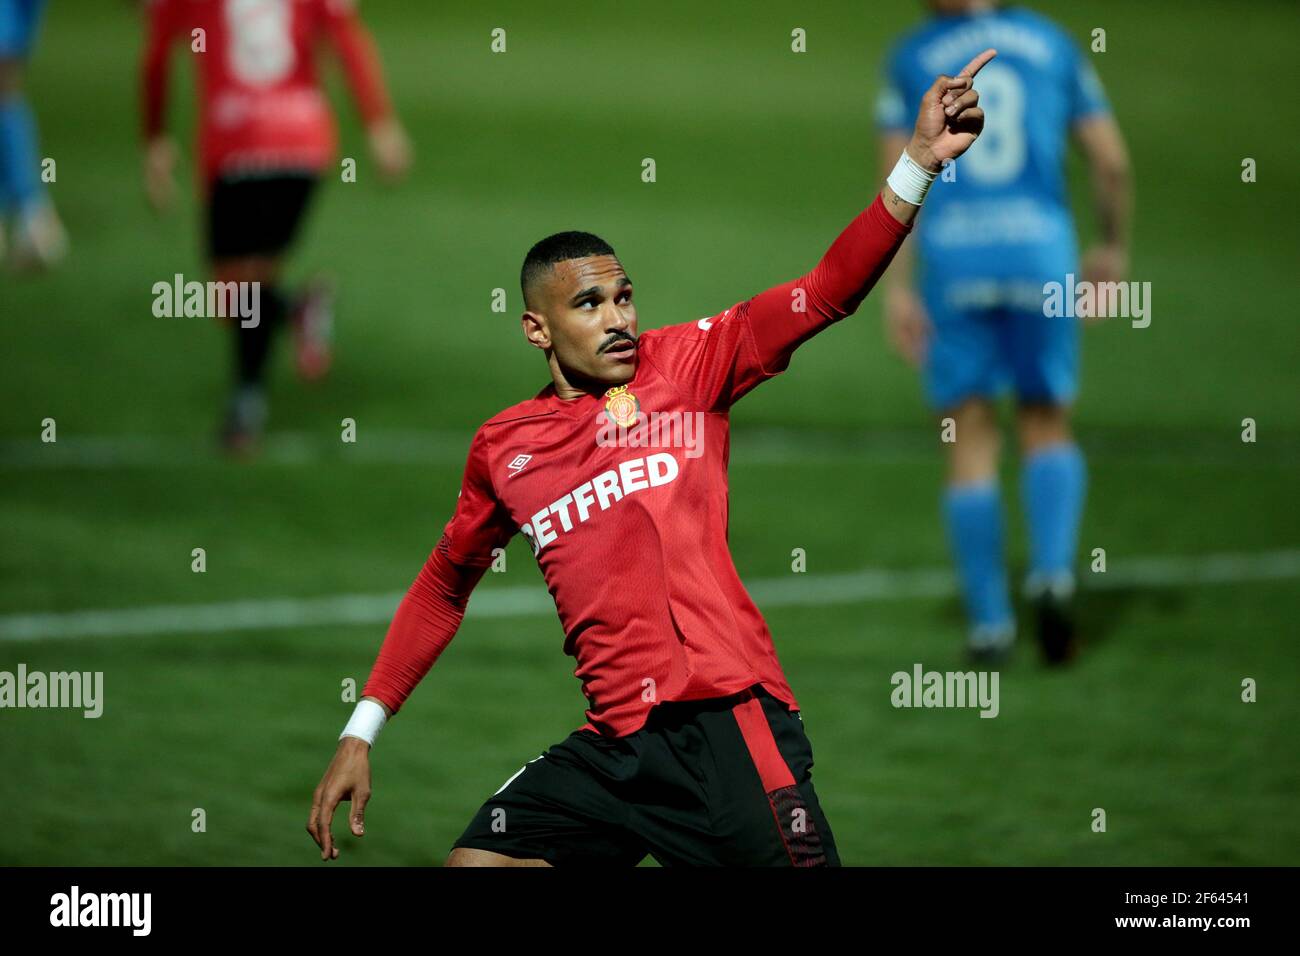 Fuenlabrada, Madrid, Spain, 29.03.2021C. F. Fuenlabrada against R. C. D. Mallorca match of the second division of Spanish soccer in match 31. Mallorca player Mboula Celebrate your goal Final score 4-1 winner Fuenlabrada with goals from the players Oscar Pichi 13 y 38  Nteka 41  and Pathe Ciss 73  Mallorca scores his player Mboula 56  Photo: Juan Carlos Rojas/Picture Alliance | usage worldwide Stock Photo